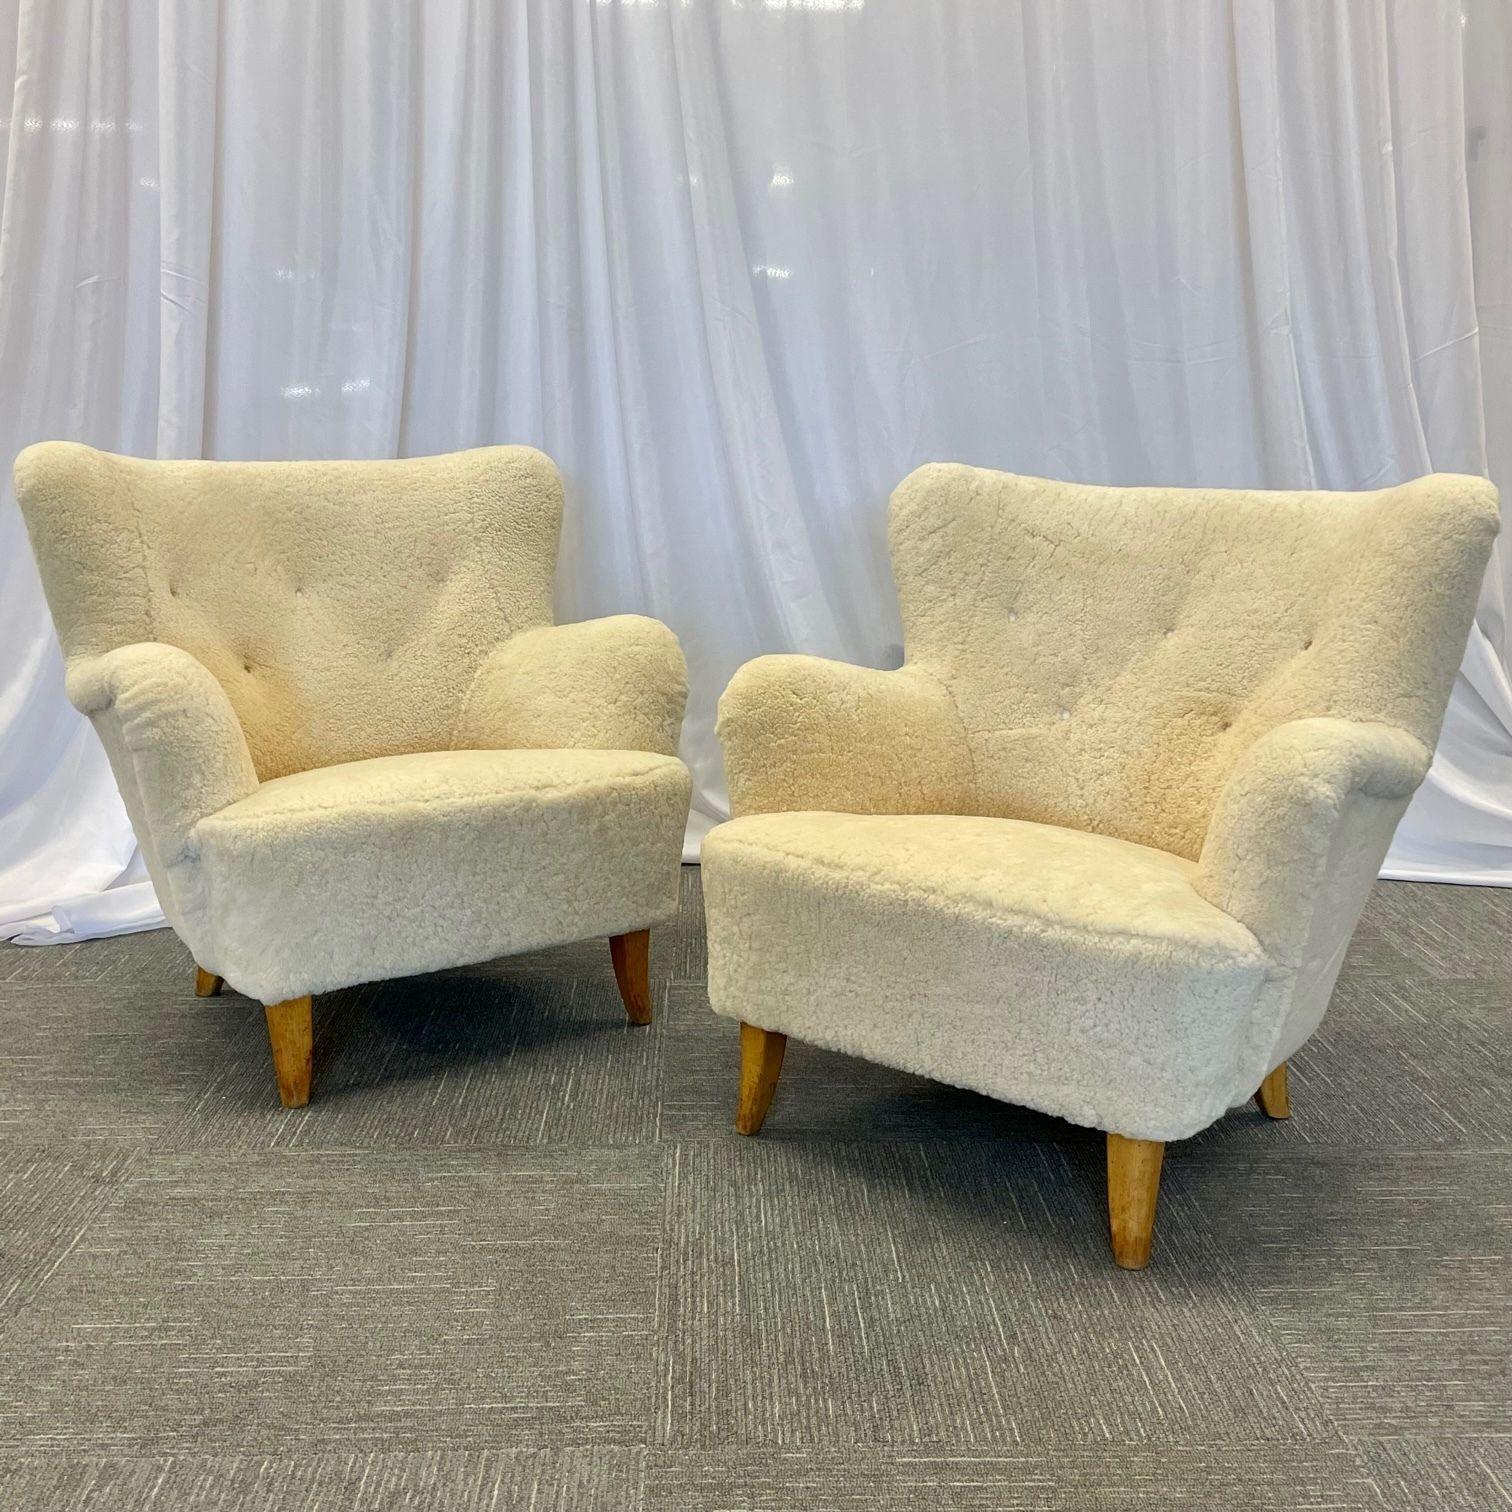 Mid-Century Modern 'Laila' lounge chairs in Sheepskin by Ilmari Lappalainen for Asko, Finland
 
Pair of chic Finnish designer lounge or armchairs chairs newly upholstered in genuine cream Sheepskin. This pair of chairs was designed by Ilmari